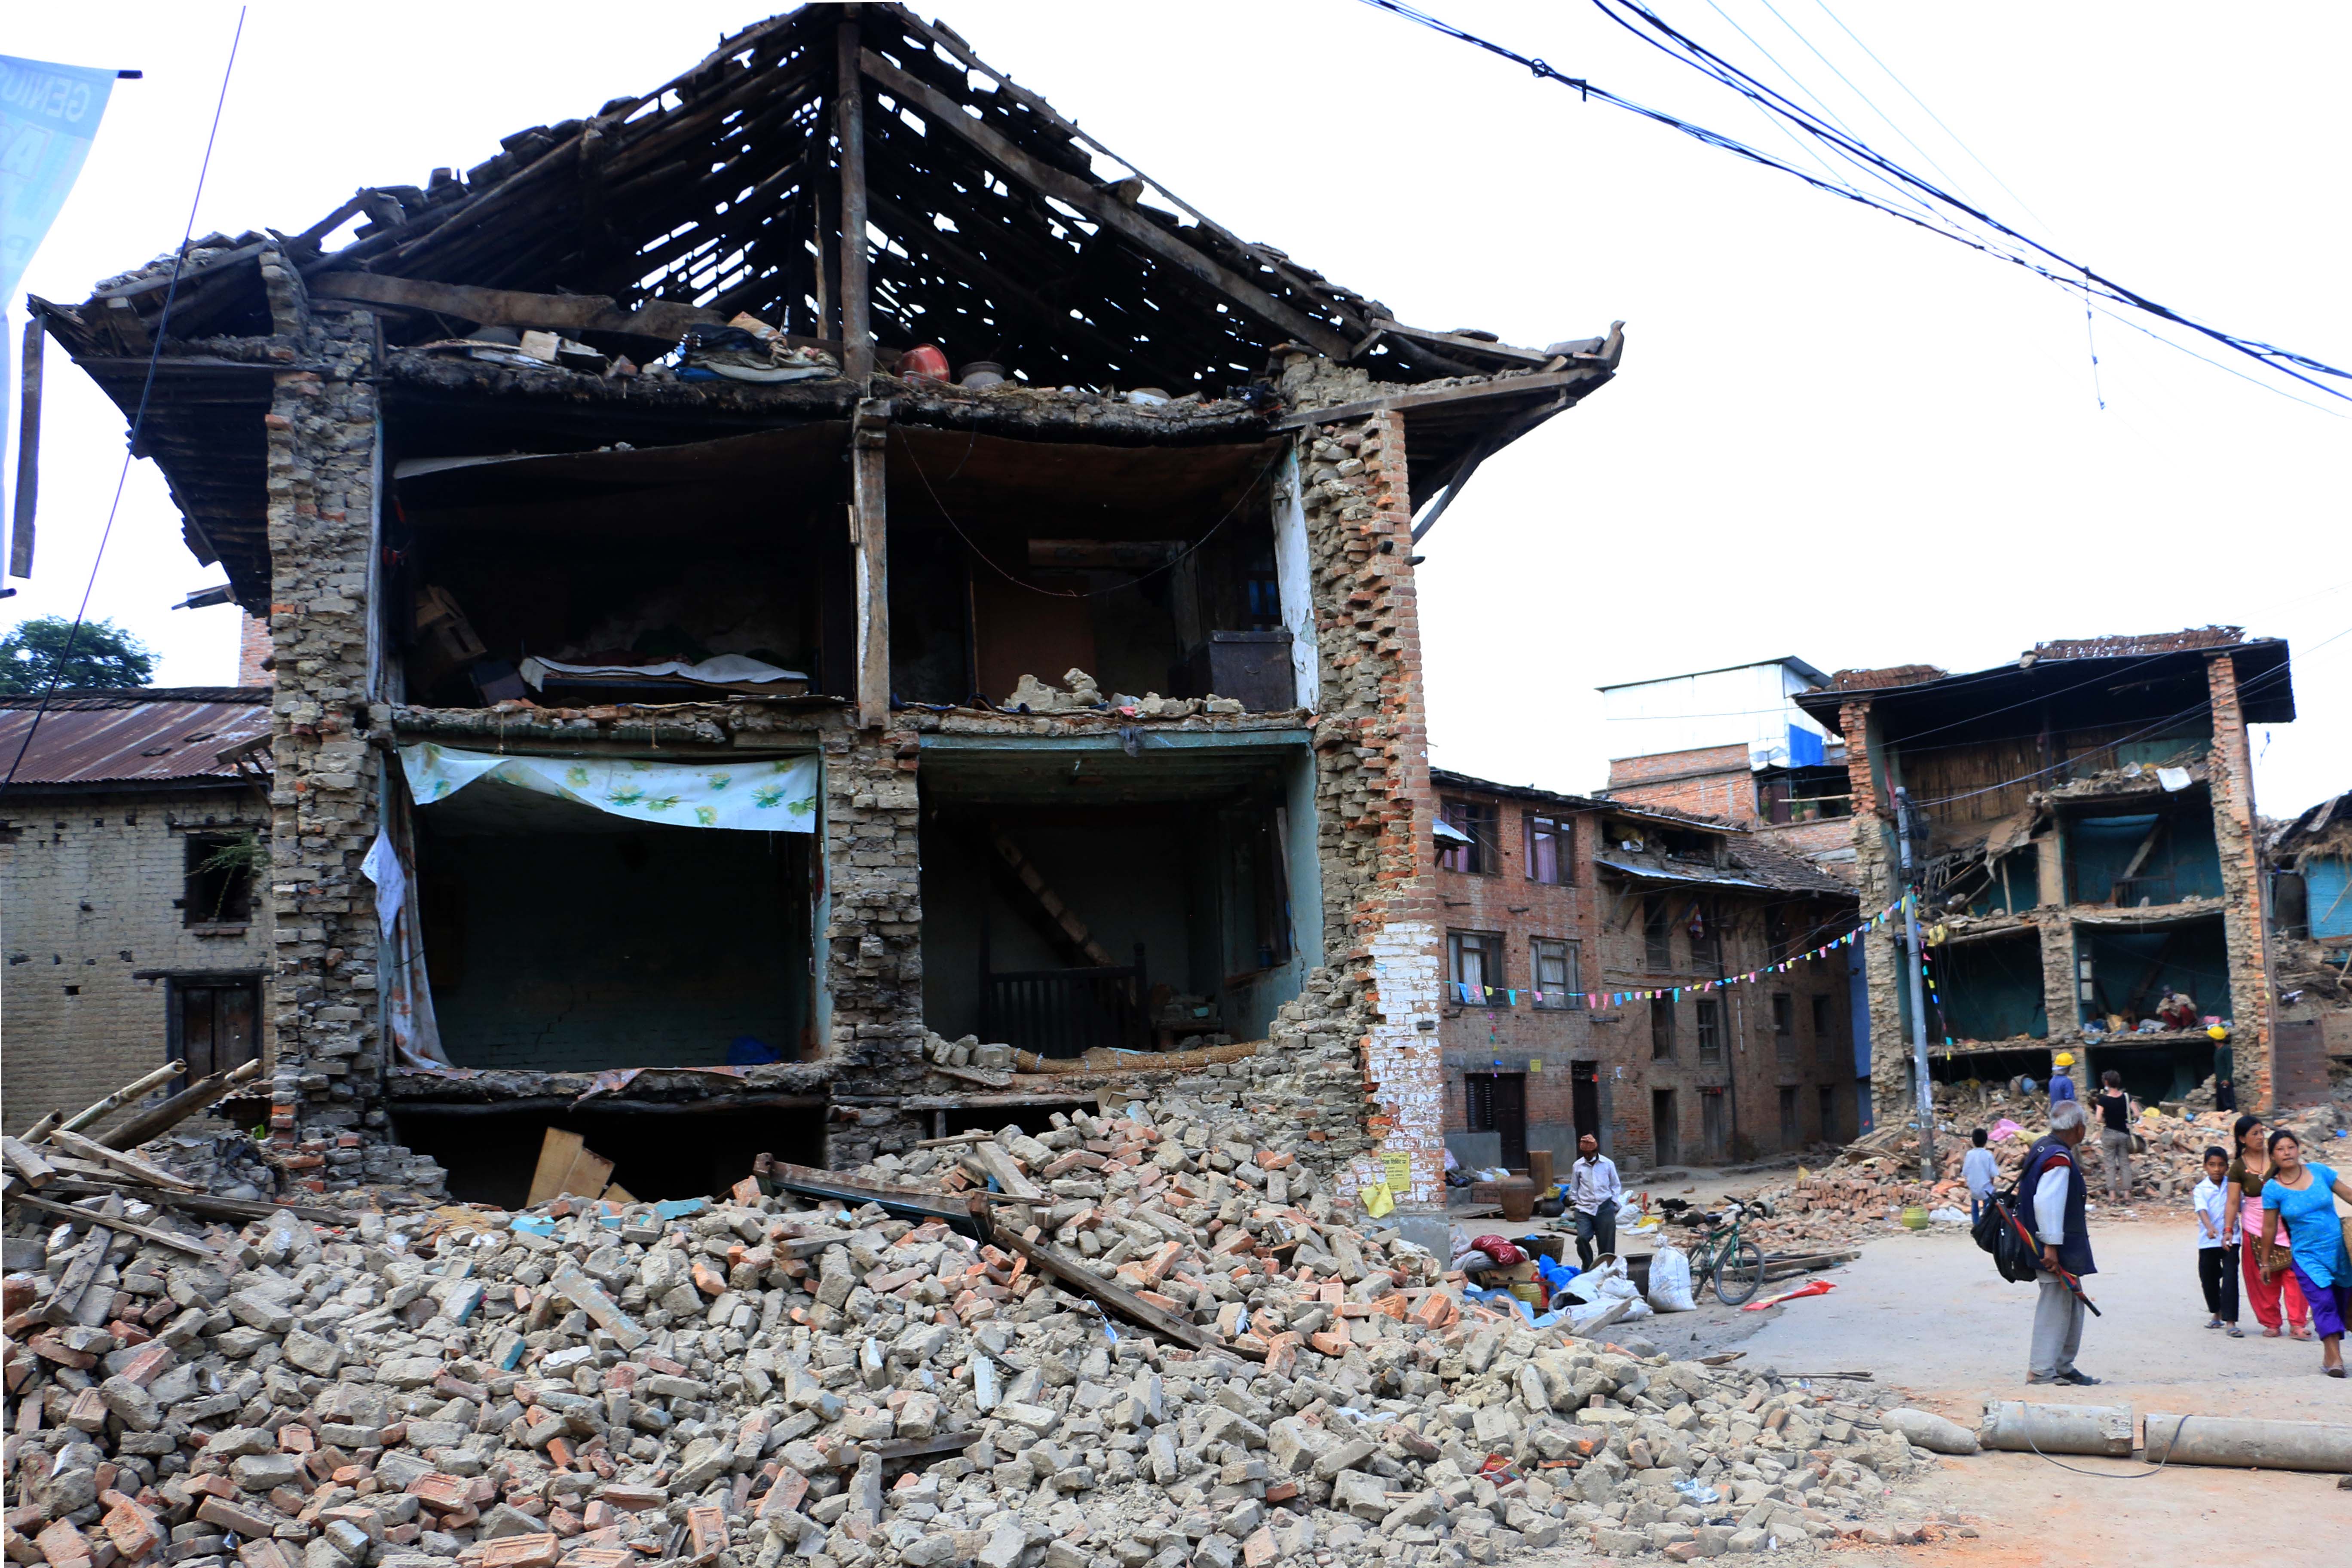 A Second Quake in Nepal Measuring 7.3 Jolts Further Destruction